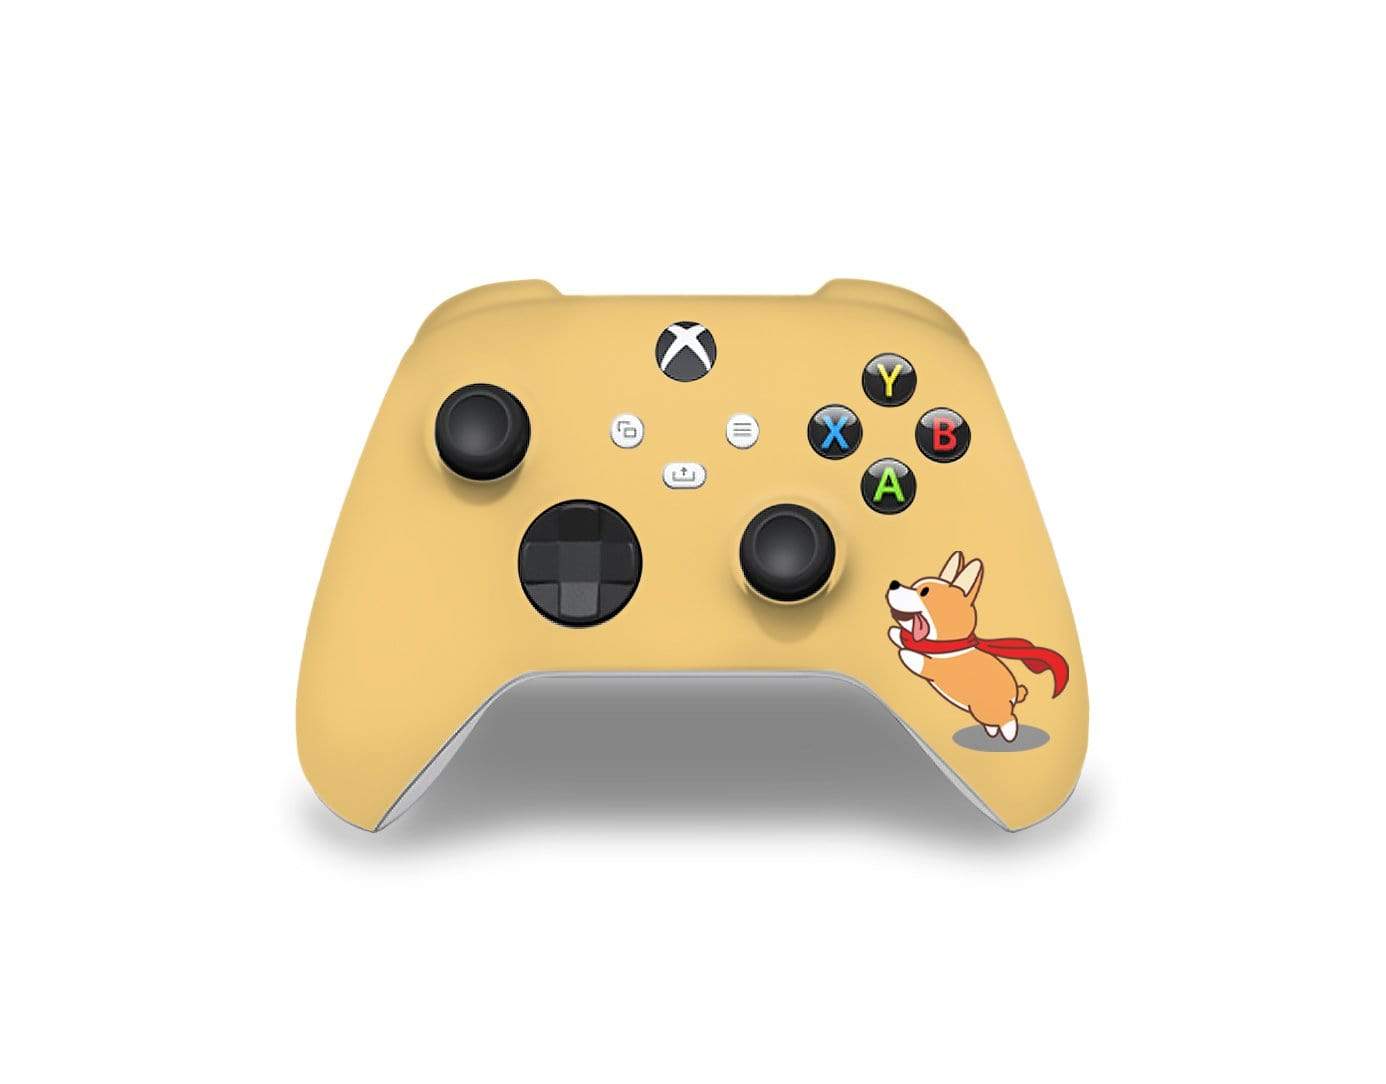 sticky-bunny-shop-xbox-series-controller-cute-corgi-xbox-series-controller-skin-14930395267190_2000x.jpg